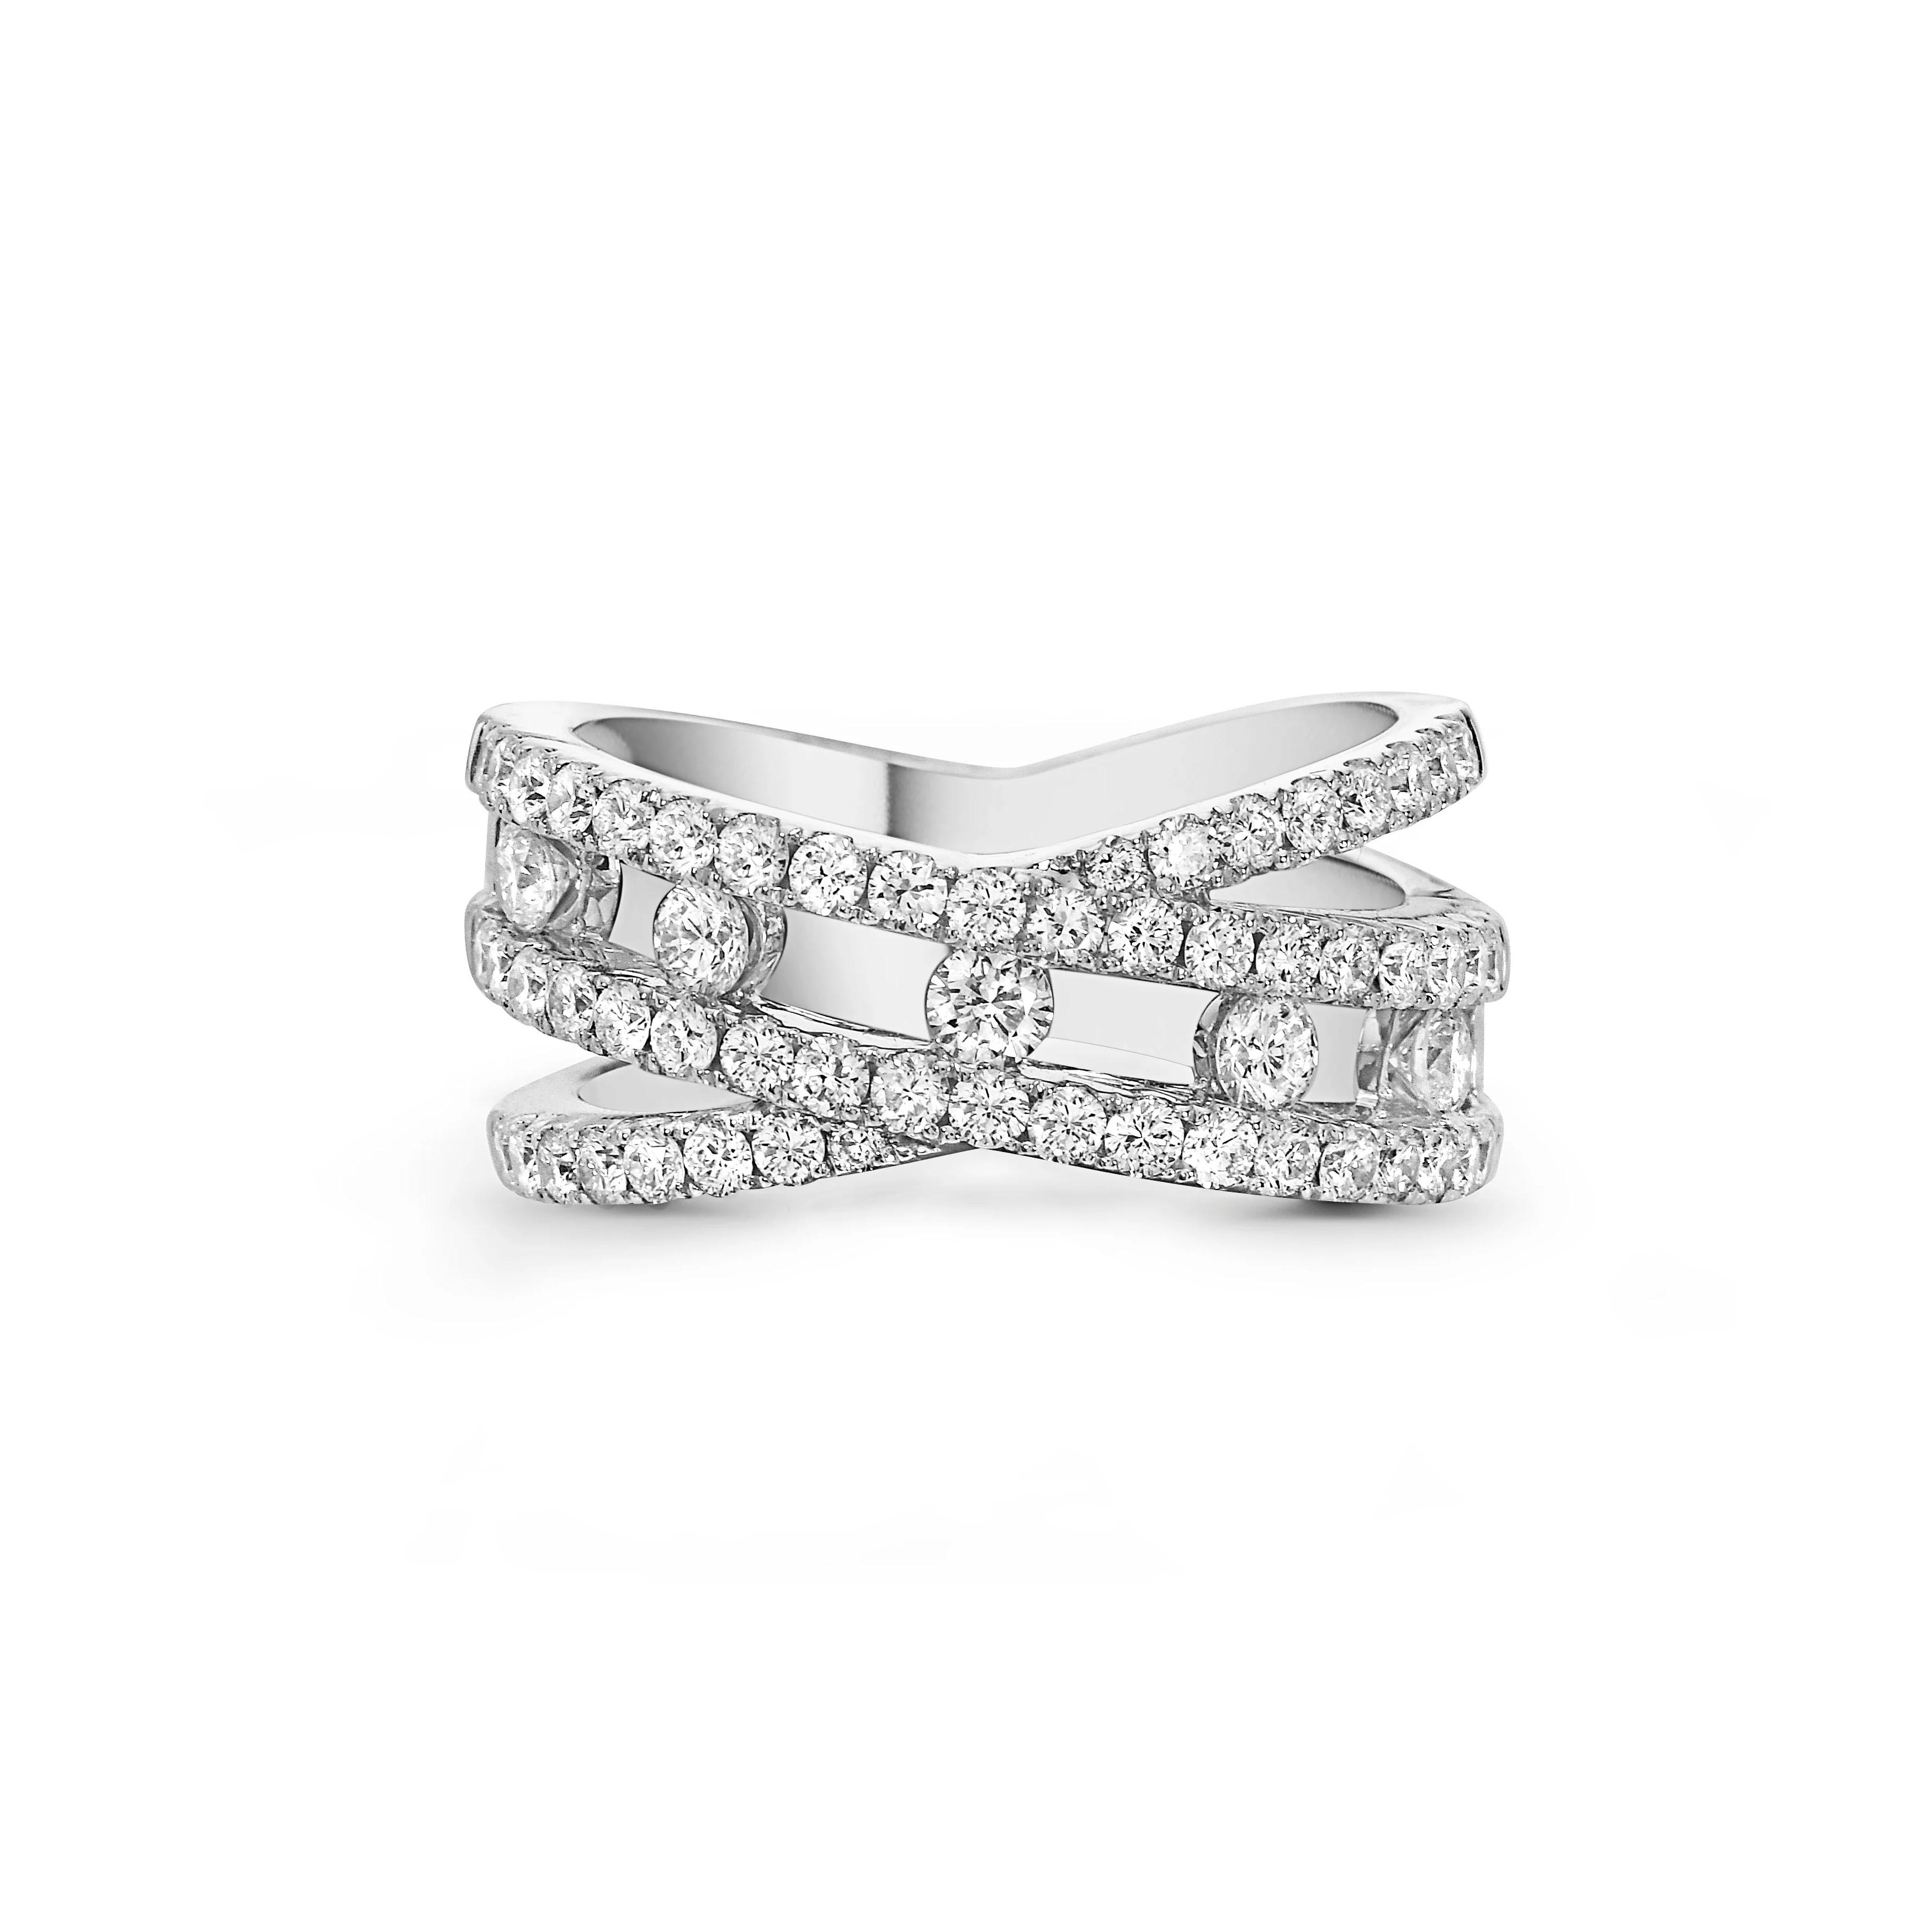 Charles Krypell Air Crossover Ring in White Gold 0